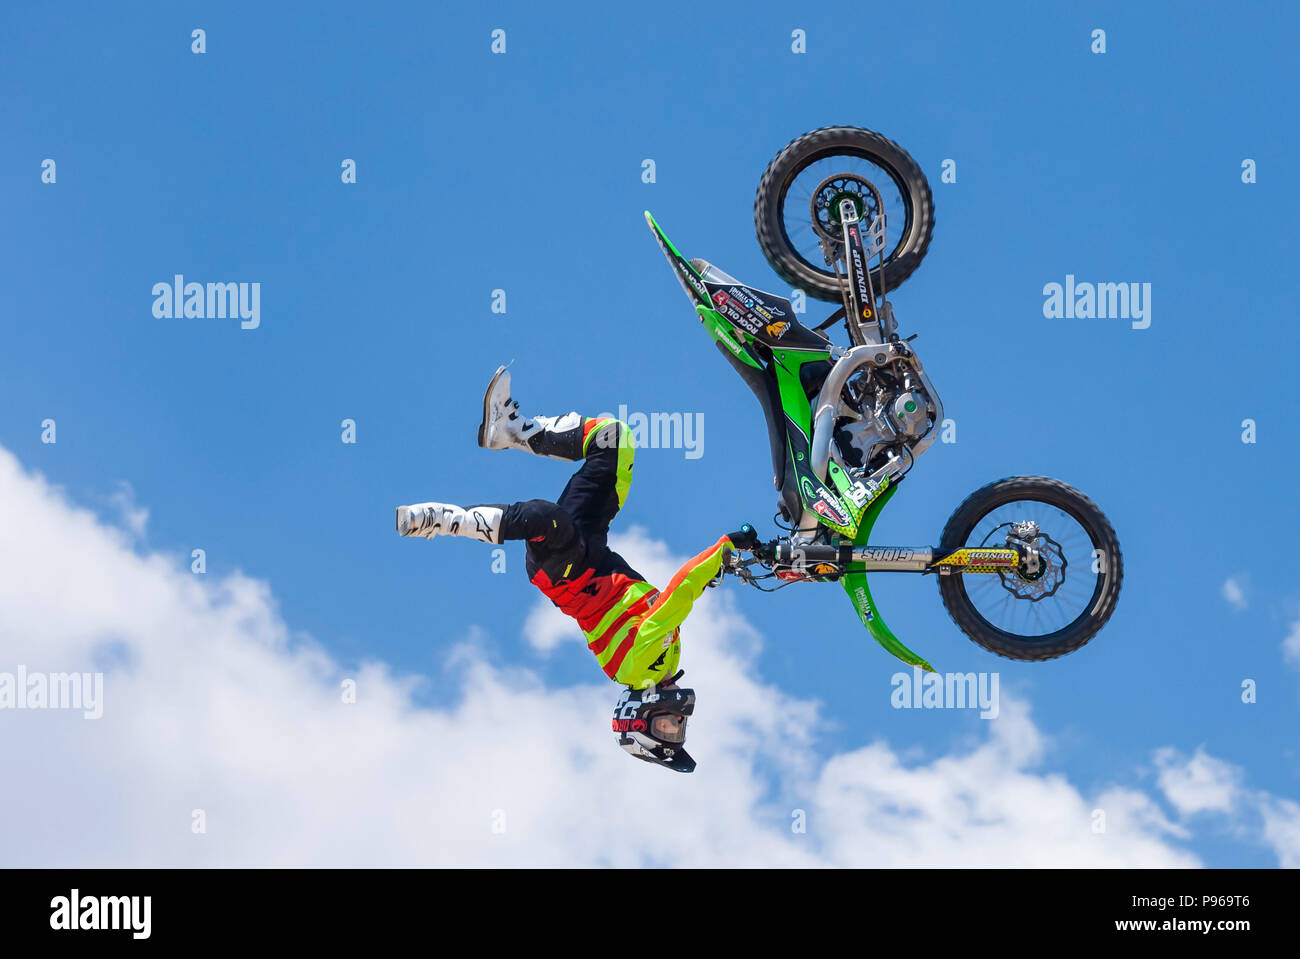 Goodwood, West Sussex, UK, 14th July 2018. Freestyle Motocross at the Gas arena Goodwood Festival of Speed. © Tony Watson/Alamy Live News Stock Photo